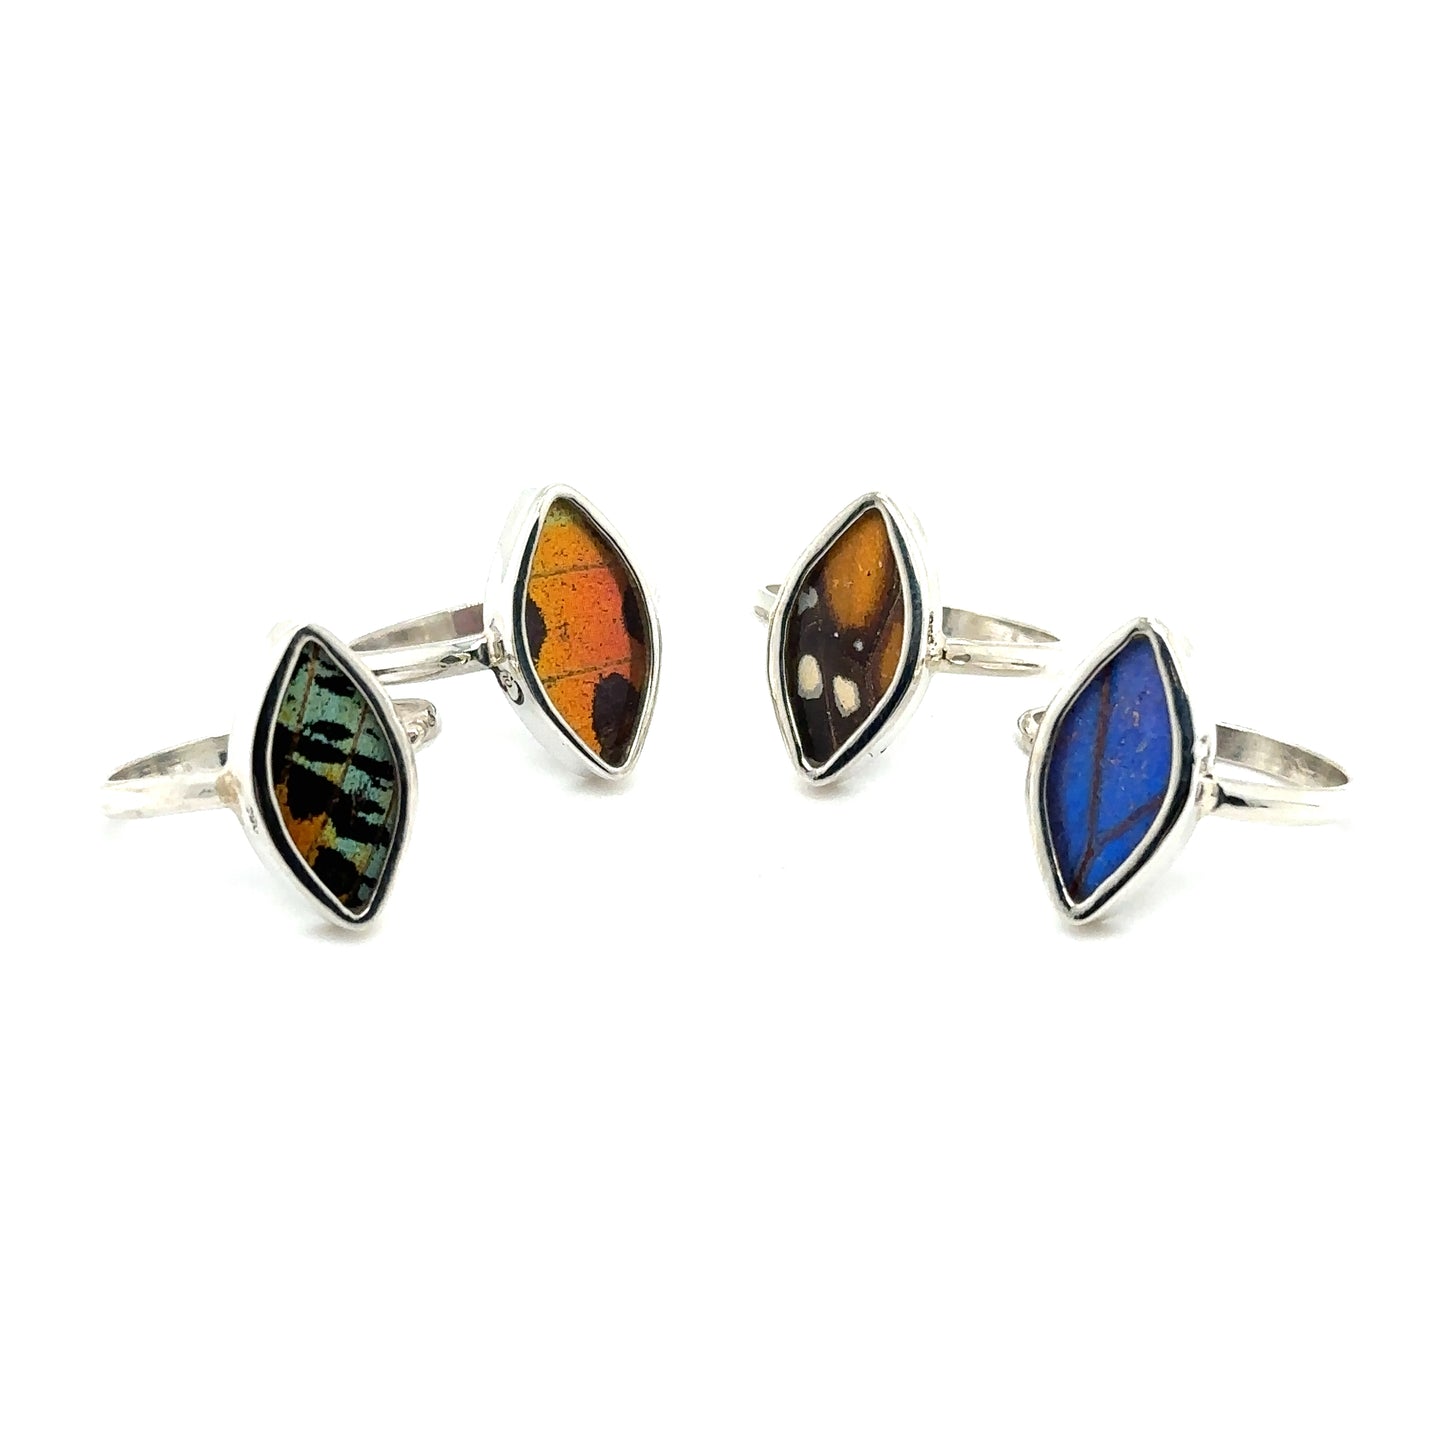 A set of Genuine Butterfly Wing Rings in Marquise Shape with different colored stones, embodying sustainable fashion and conservation.